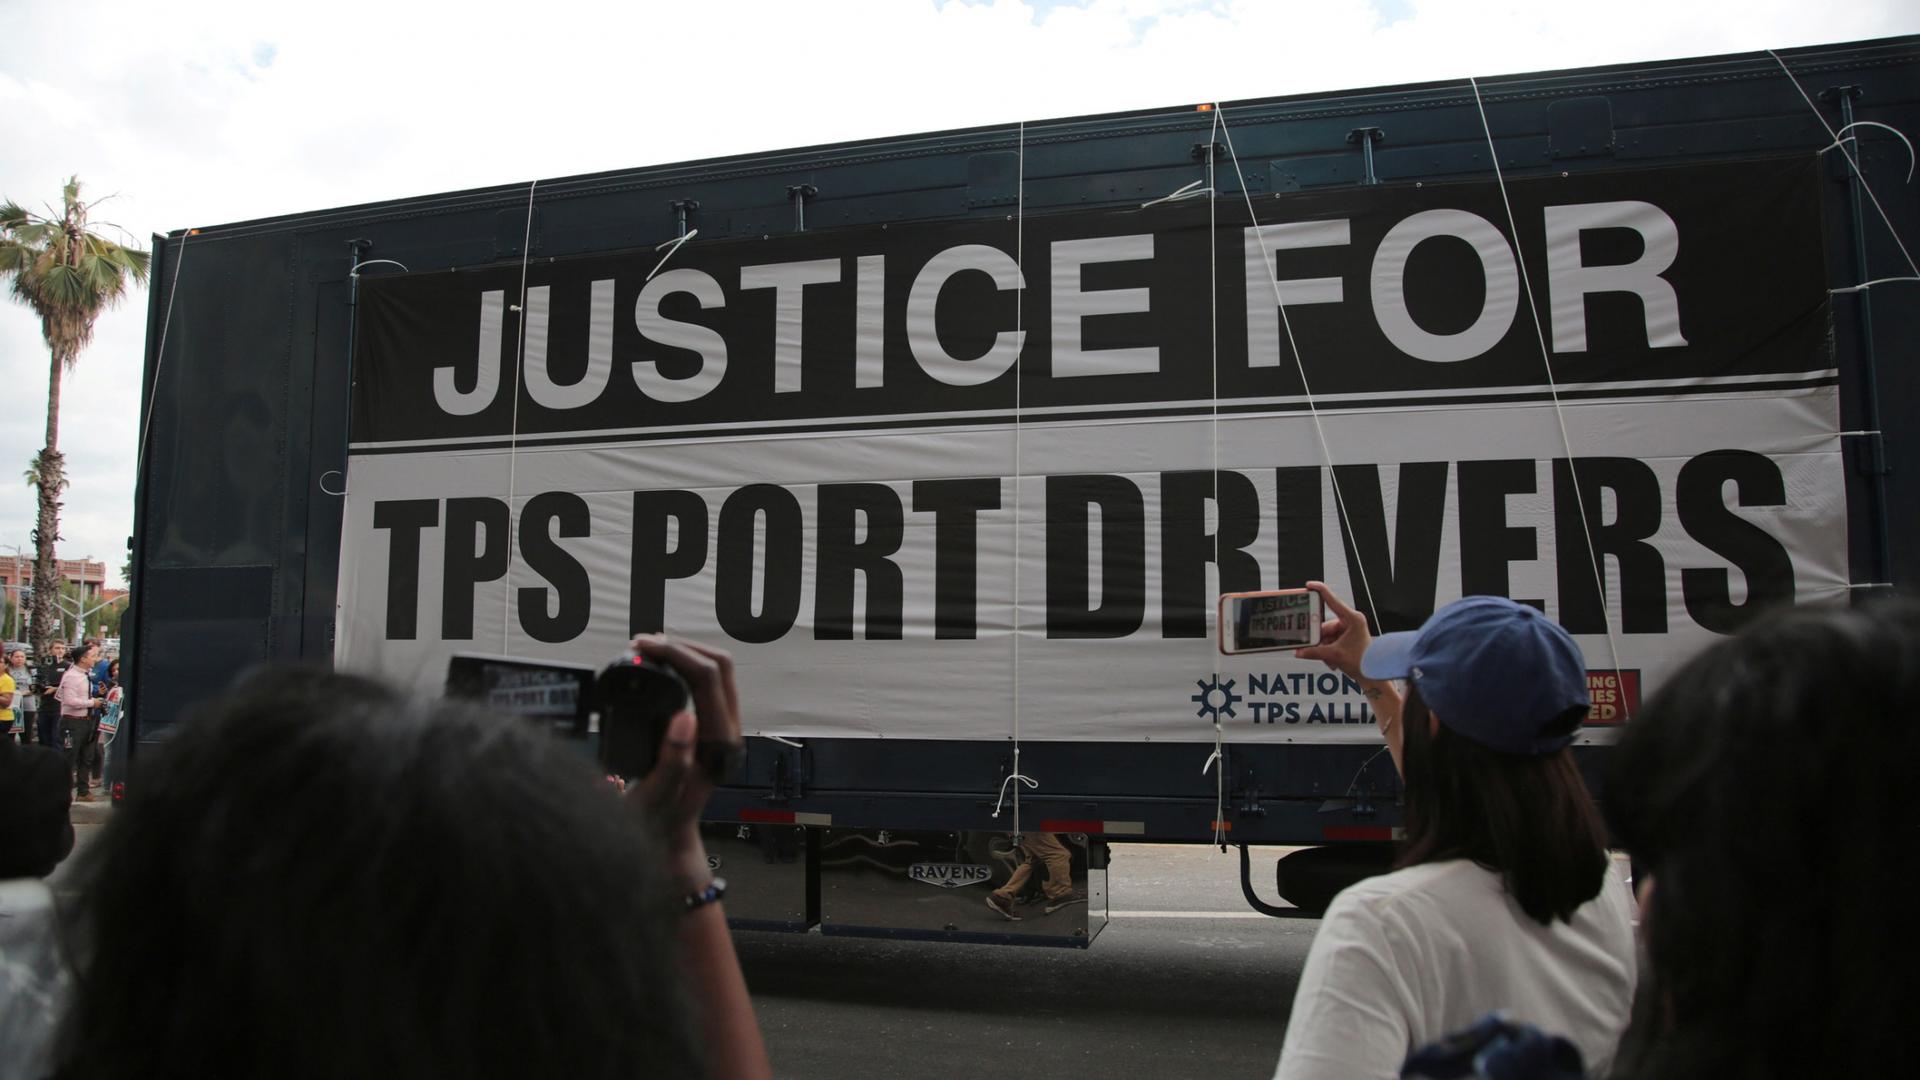 A large sign hanging off the side of a tractor reads "Justice for TPS Port Drivers" 